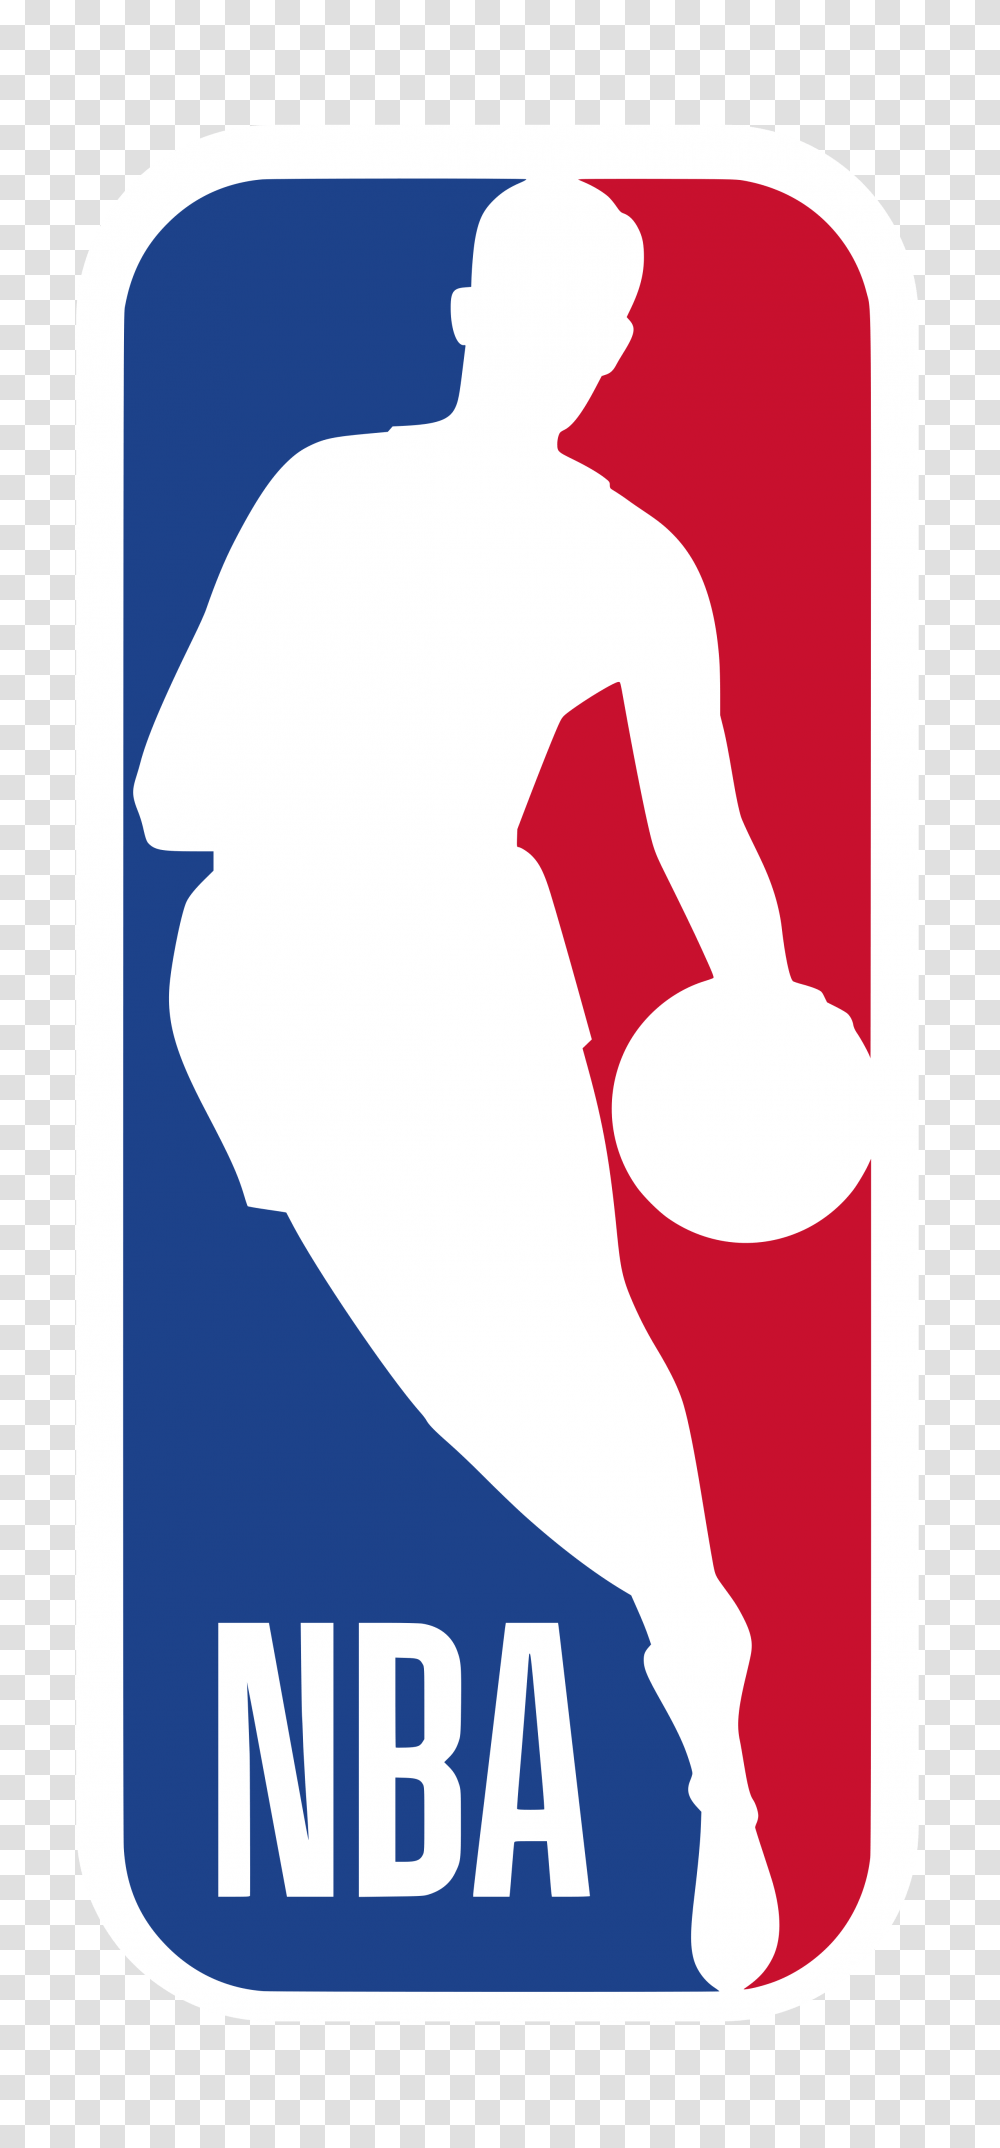 Image Result For Nba Logo Basketball Logos Art Nba, Person, Face, Hand, People Transparent Png